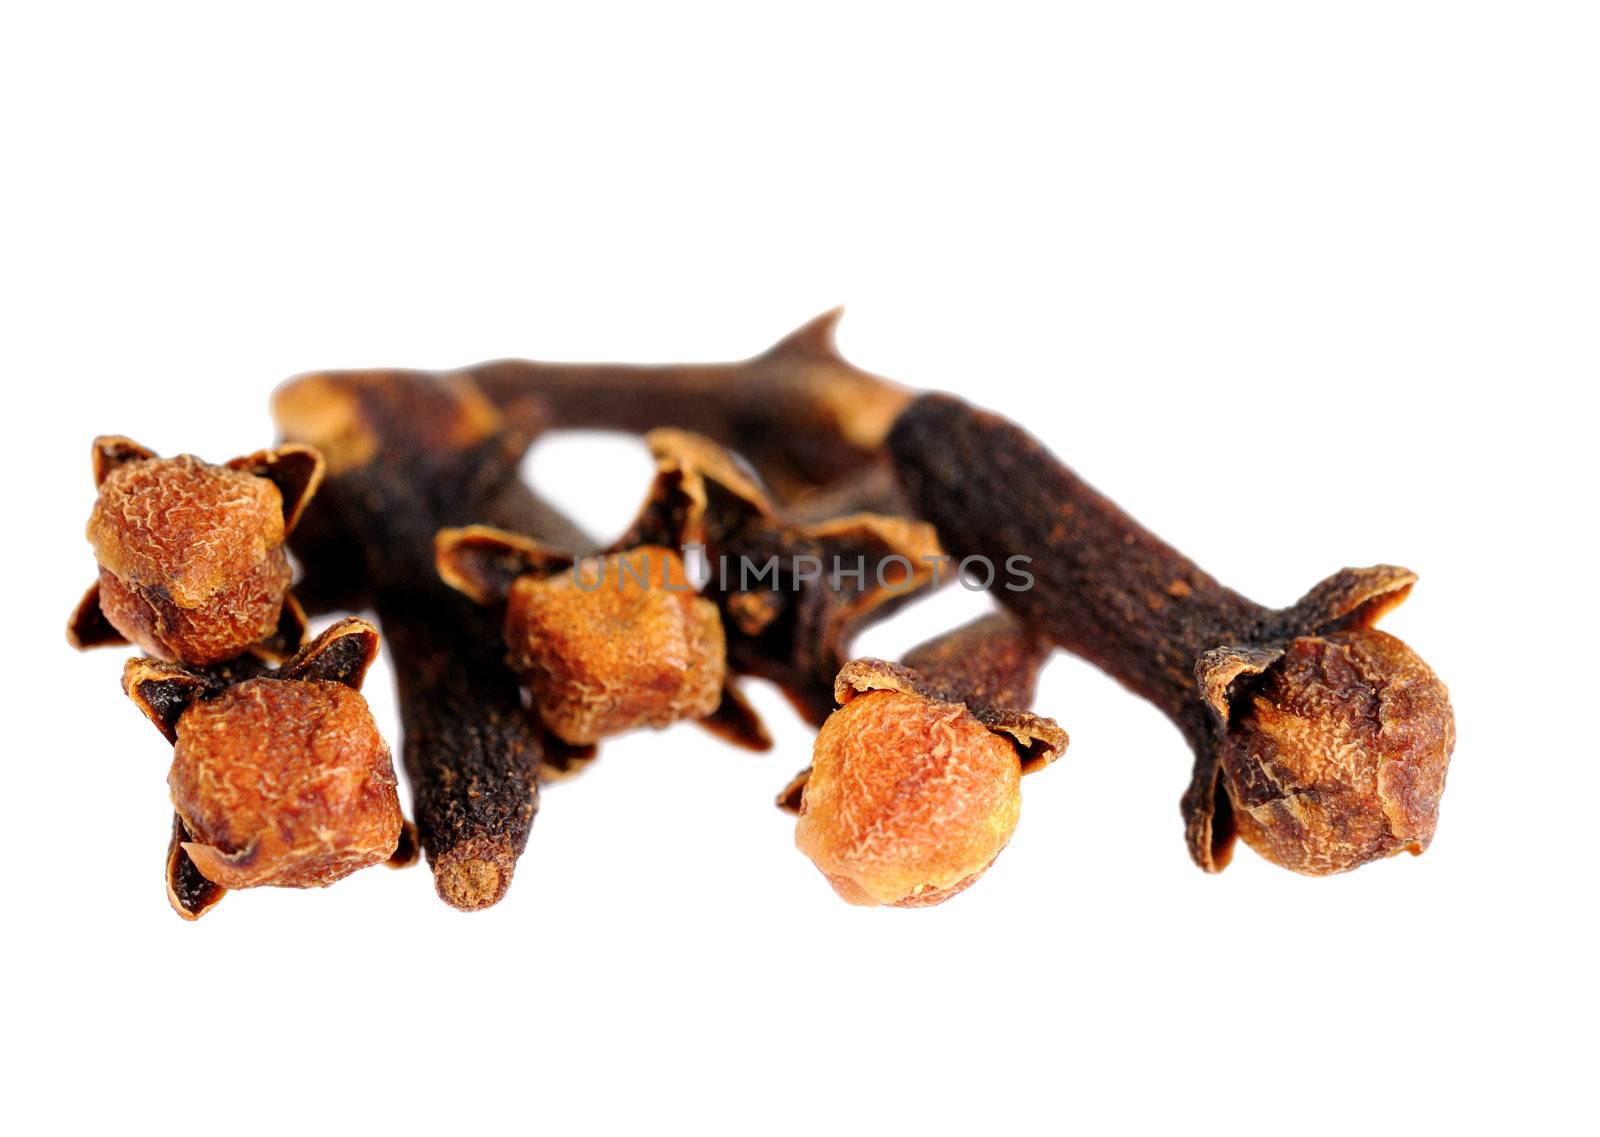 Heap of dry aroma cloves on white background. Shallow depth of field.